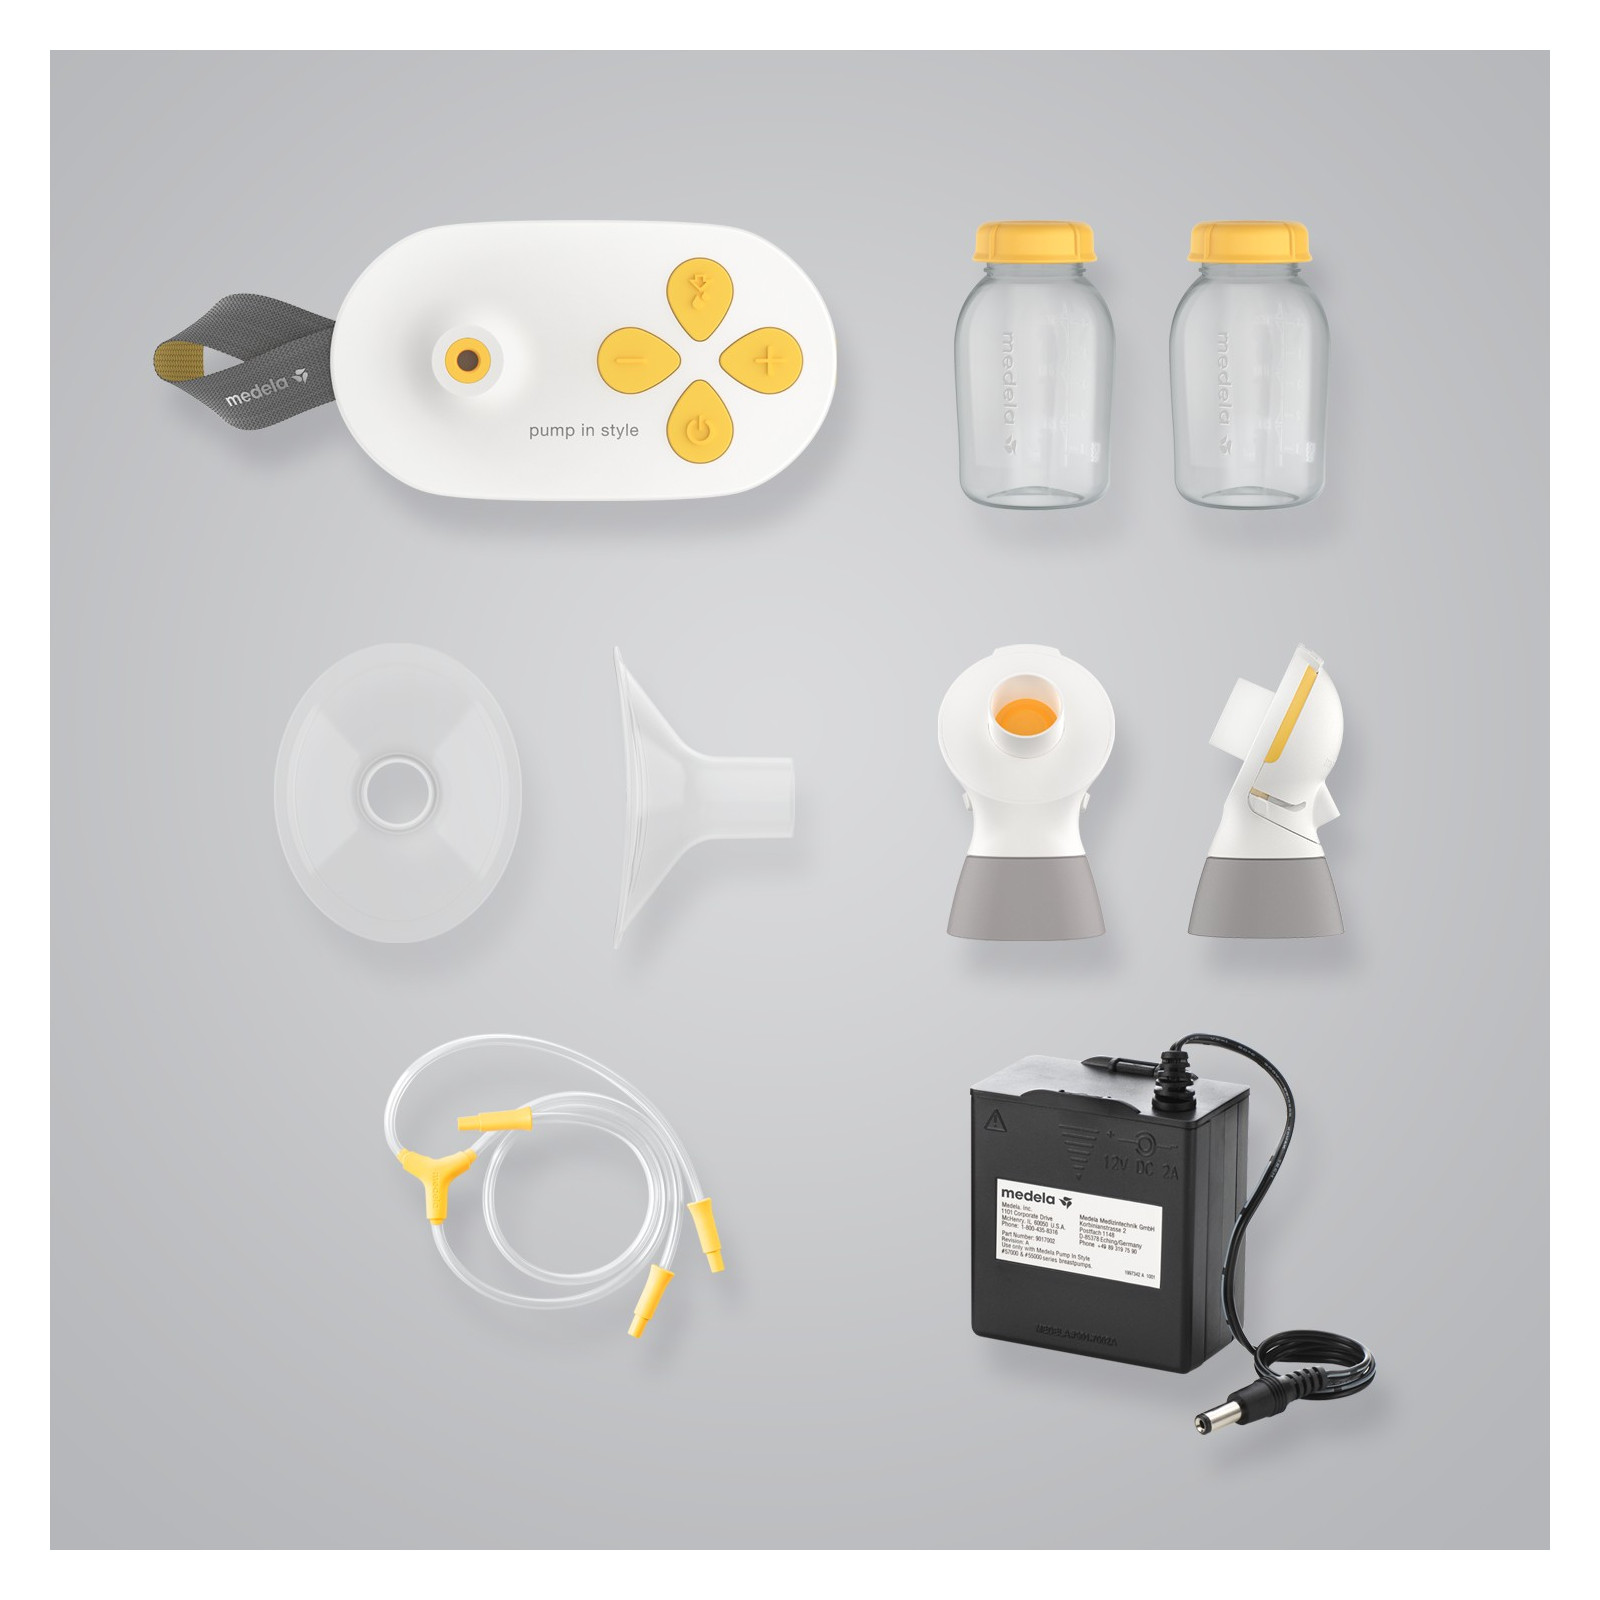 https://amedsupplies.com/1216-original/medela-pump-in-style-with-maxflow-double-electric-breast-pump.jpg